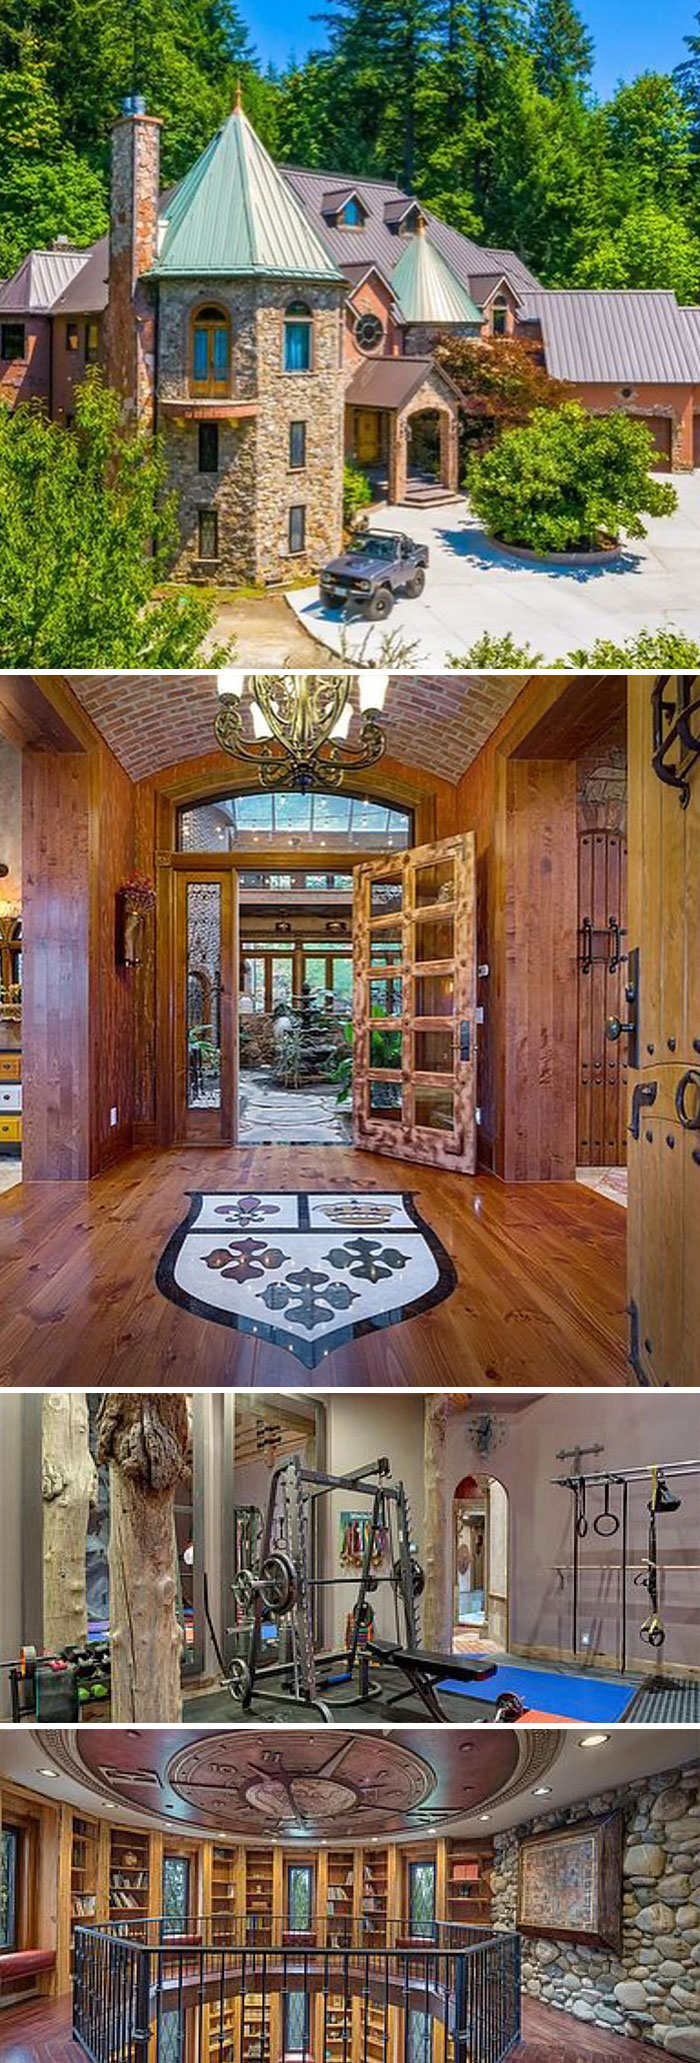 Your Very Own Game Of Thrones House. Recently Sold For $3,900,000